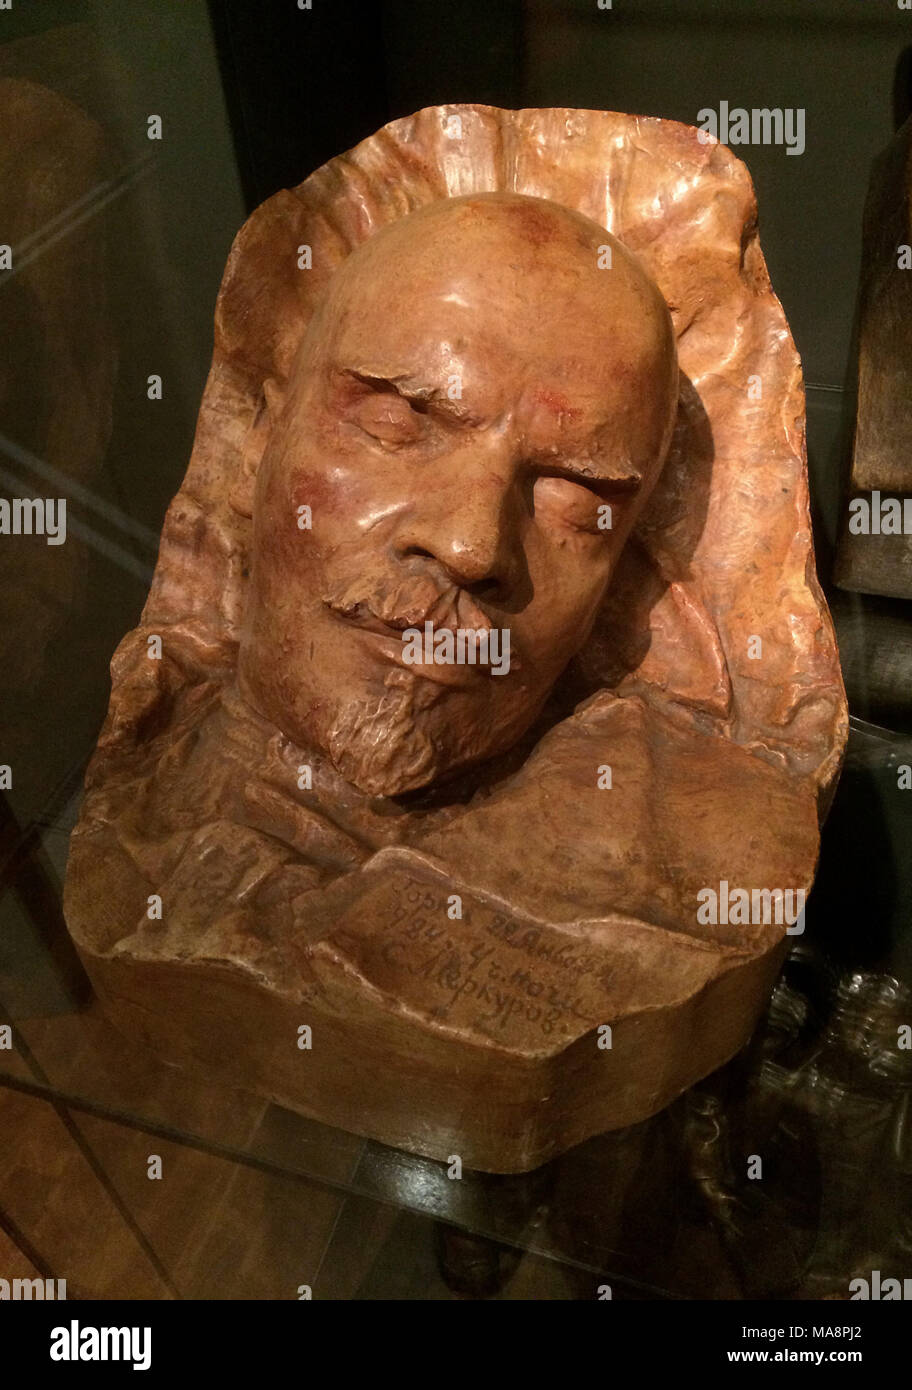 Death mask of Vladimir Lenin on display at the exhibition in the Gеrmаn  Нistоrical Мusеum (Dеutschеs Нistоrischеs Мusеum) in Веrlin, Gеrmany. The  death mask was taken by Russian and Soviet sculptor Sergey